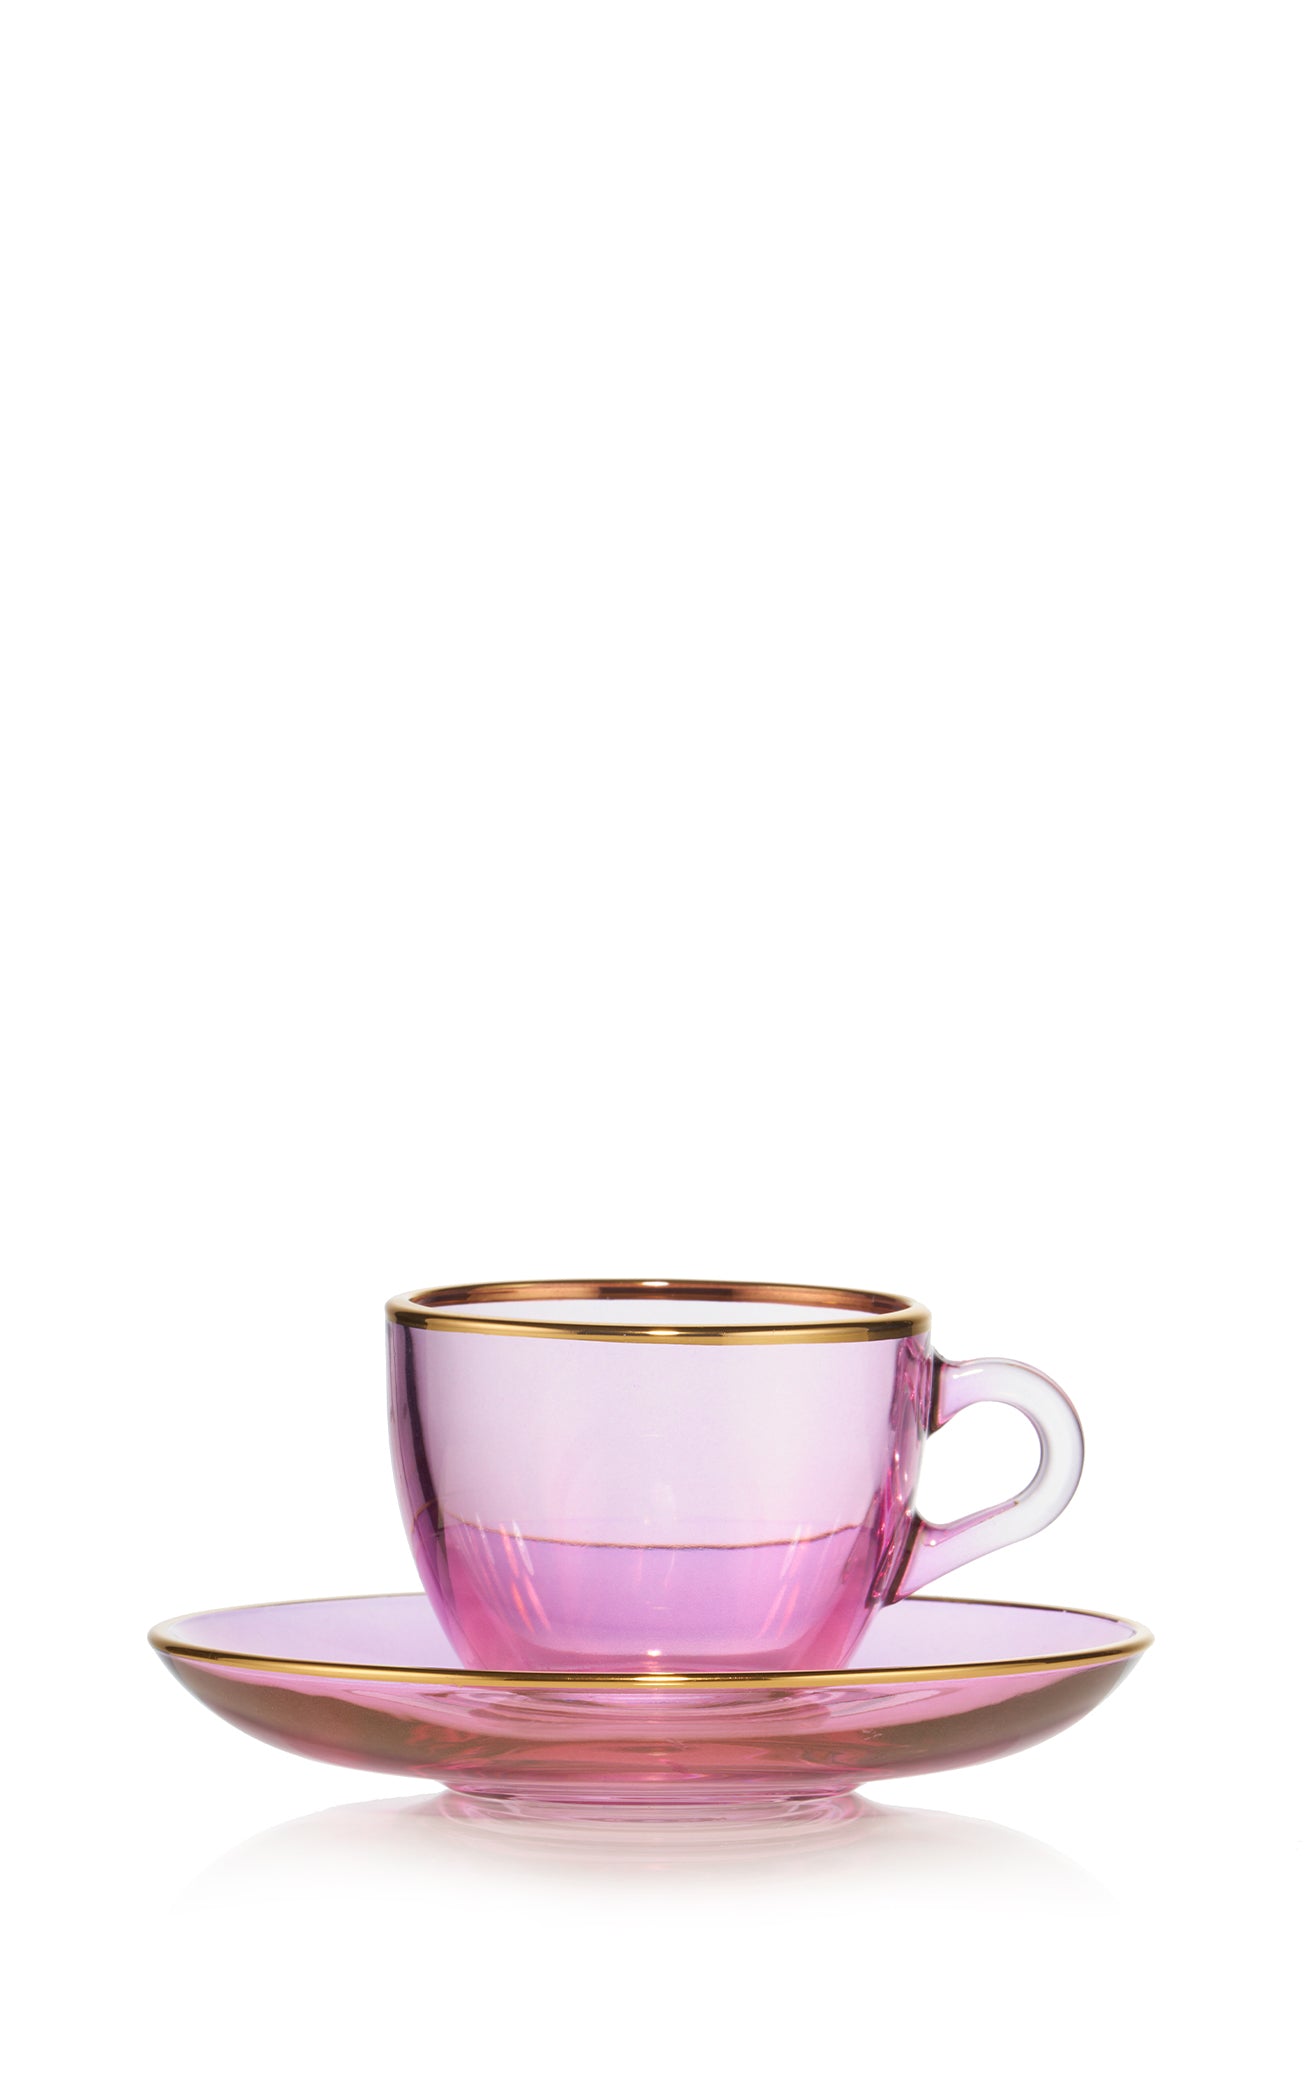 Handblown Glass Espresso Cup and Saucer in Pink with Gold Rim